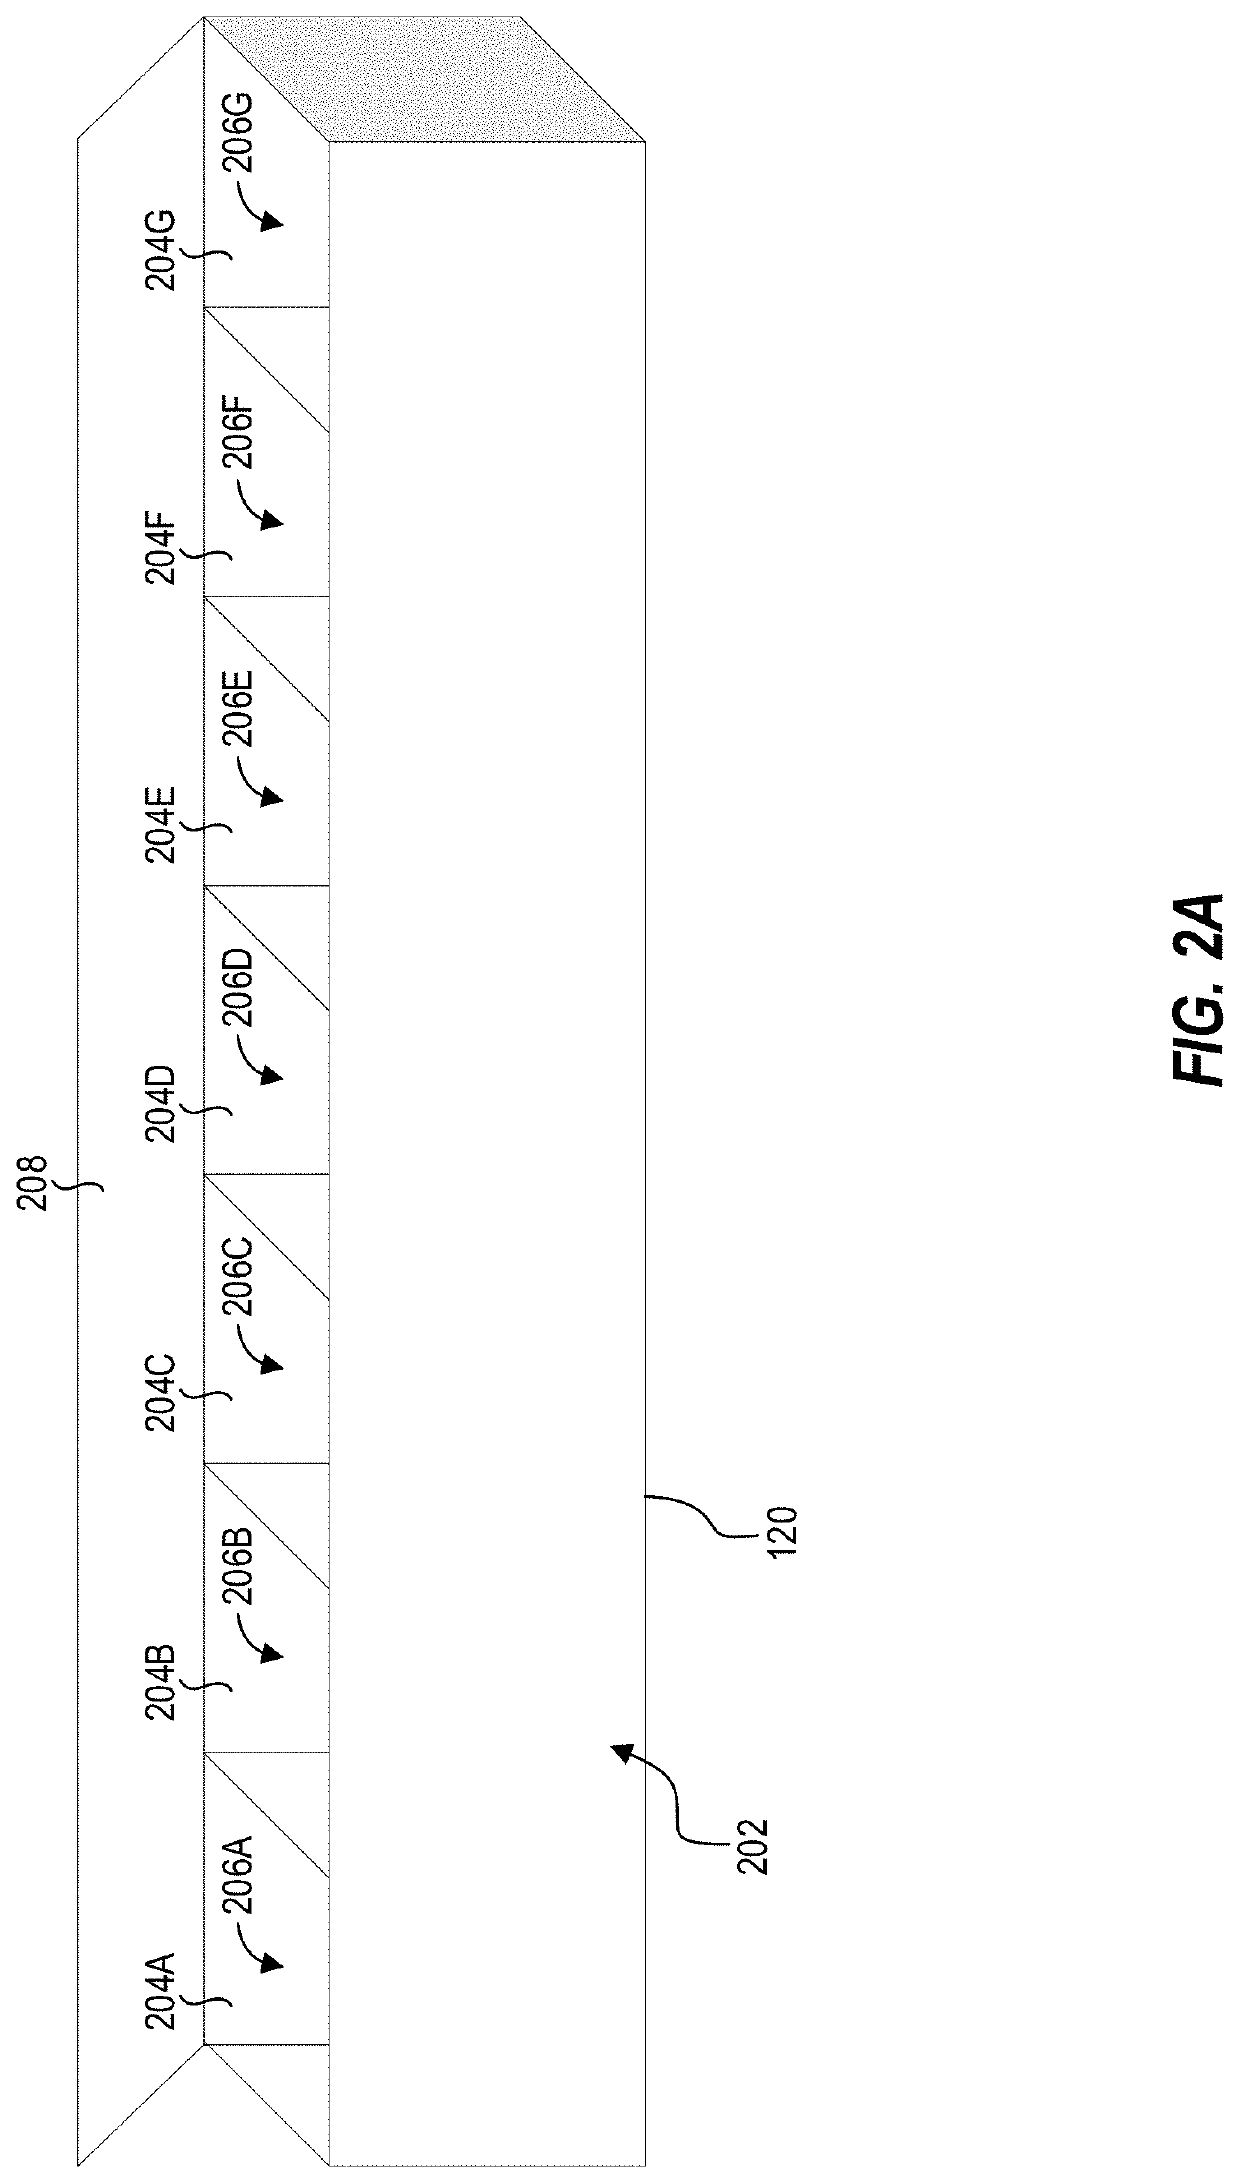 Systems and methods for facilitating self-administration of pills